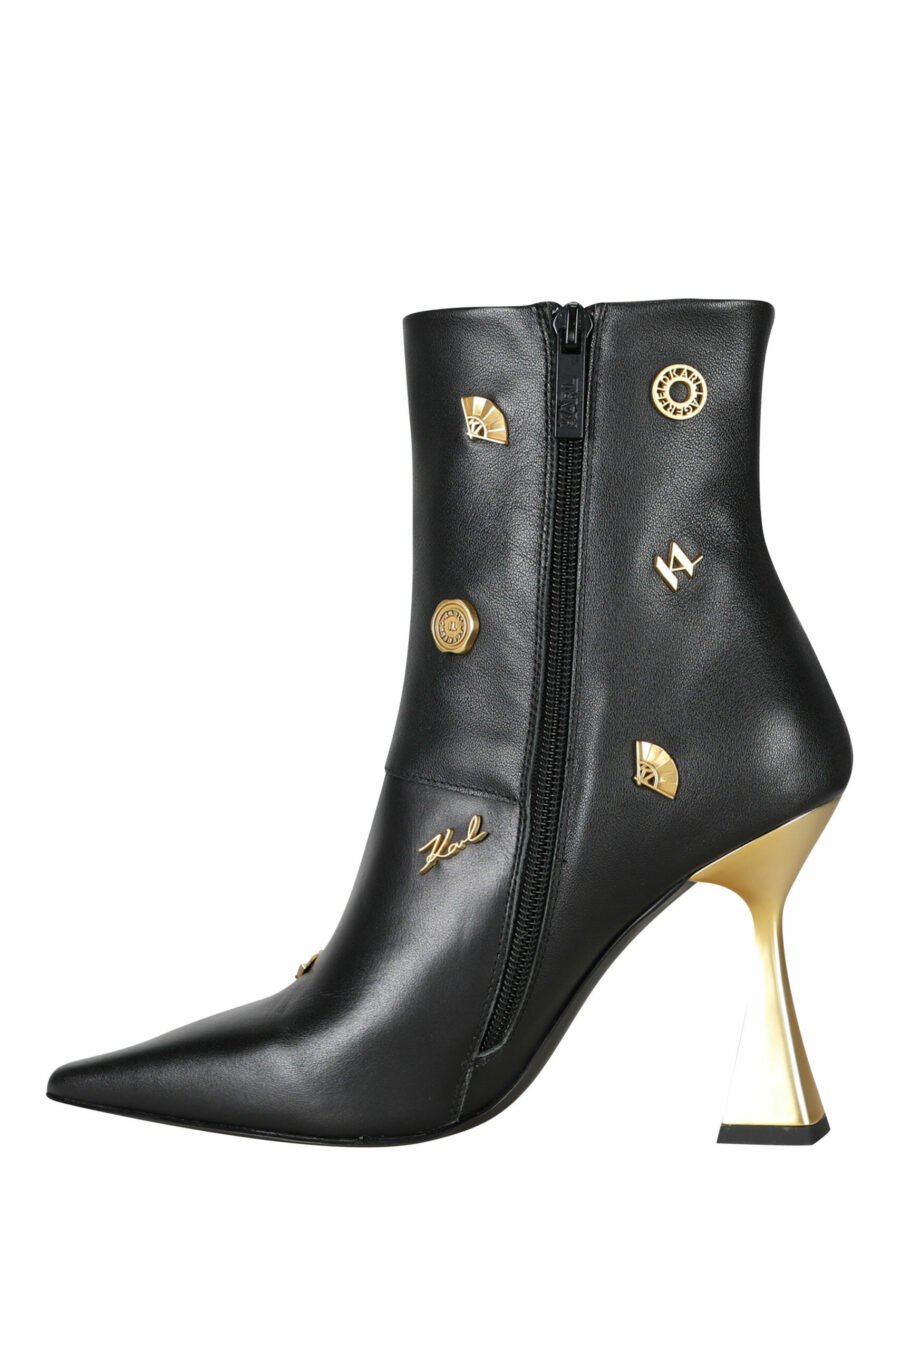 Black ankle boots with gold heel and pins - 505952982034 2 scaled